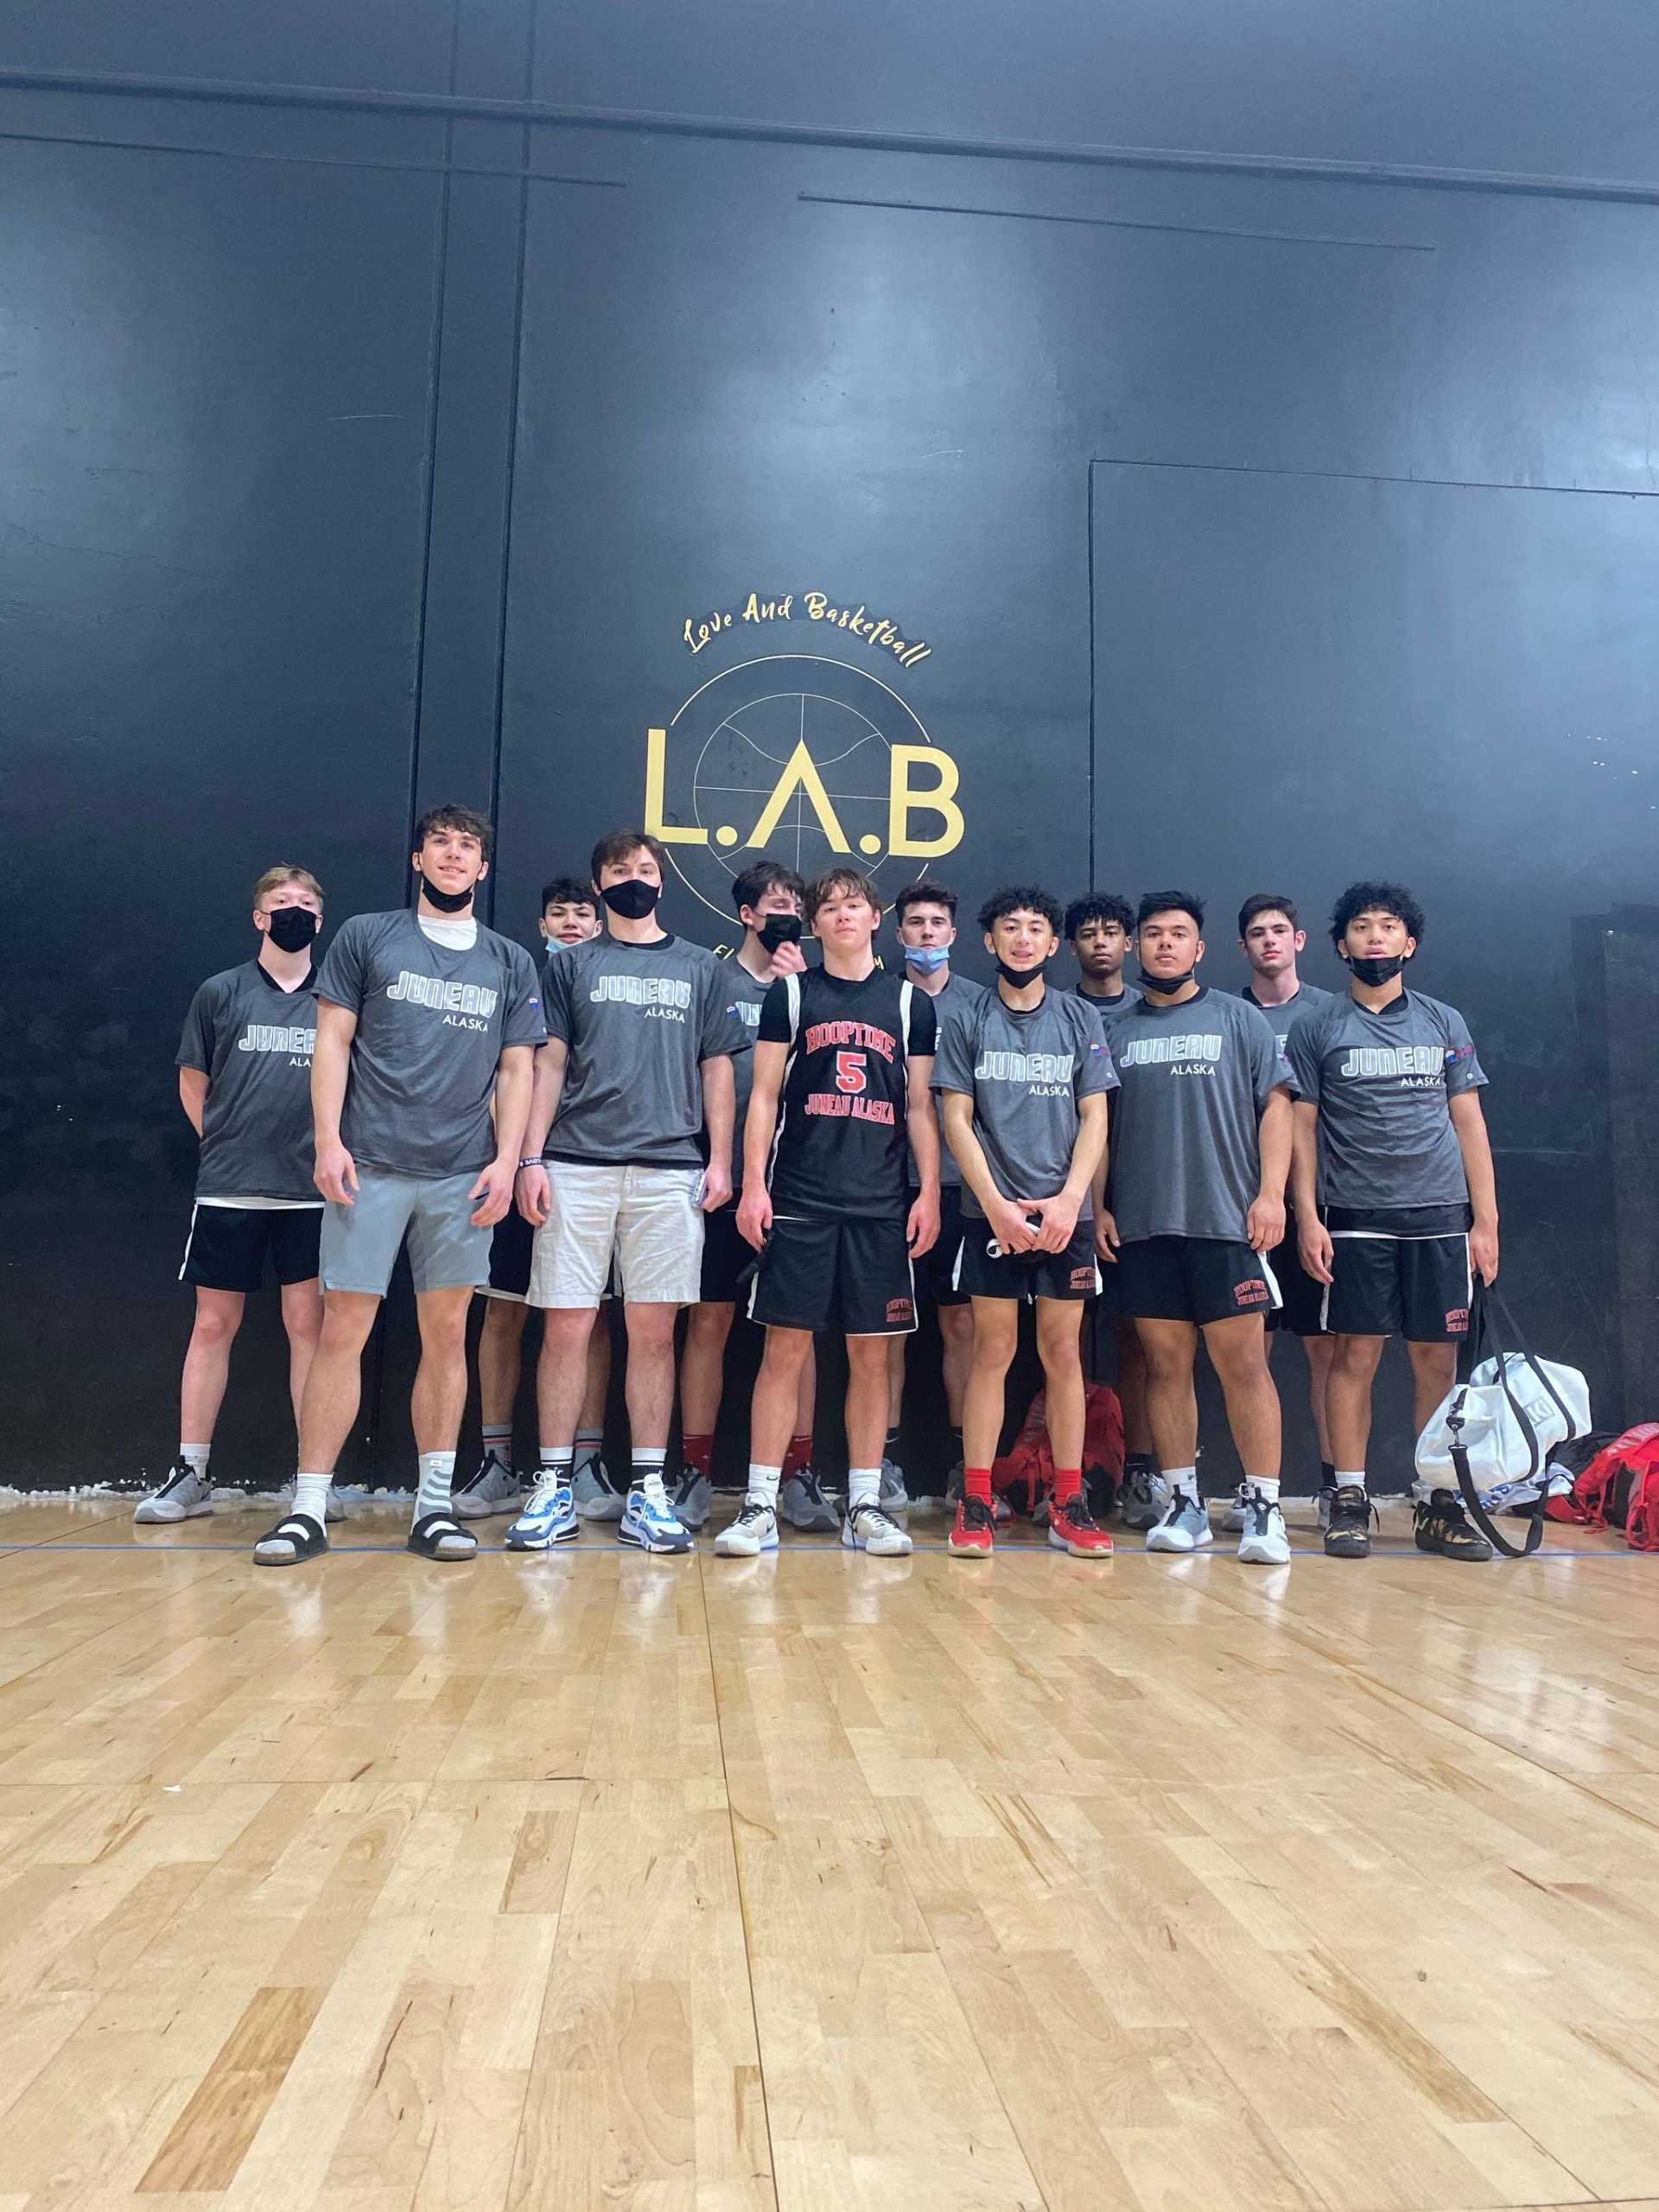 Members from the Juneau-Douglas High School: Yadaa.at Kalé boys basketball team traveled to California to compete in an independent tournament on March 26, 2021 after high coronavirus levels squashed their hopes of going to the Alaska state championship. (Courtesy photo / Zoey Kriegmont)